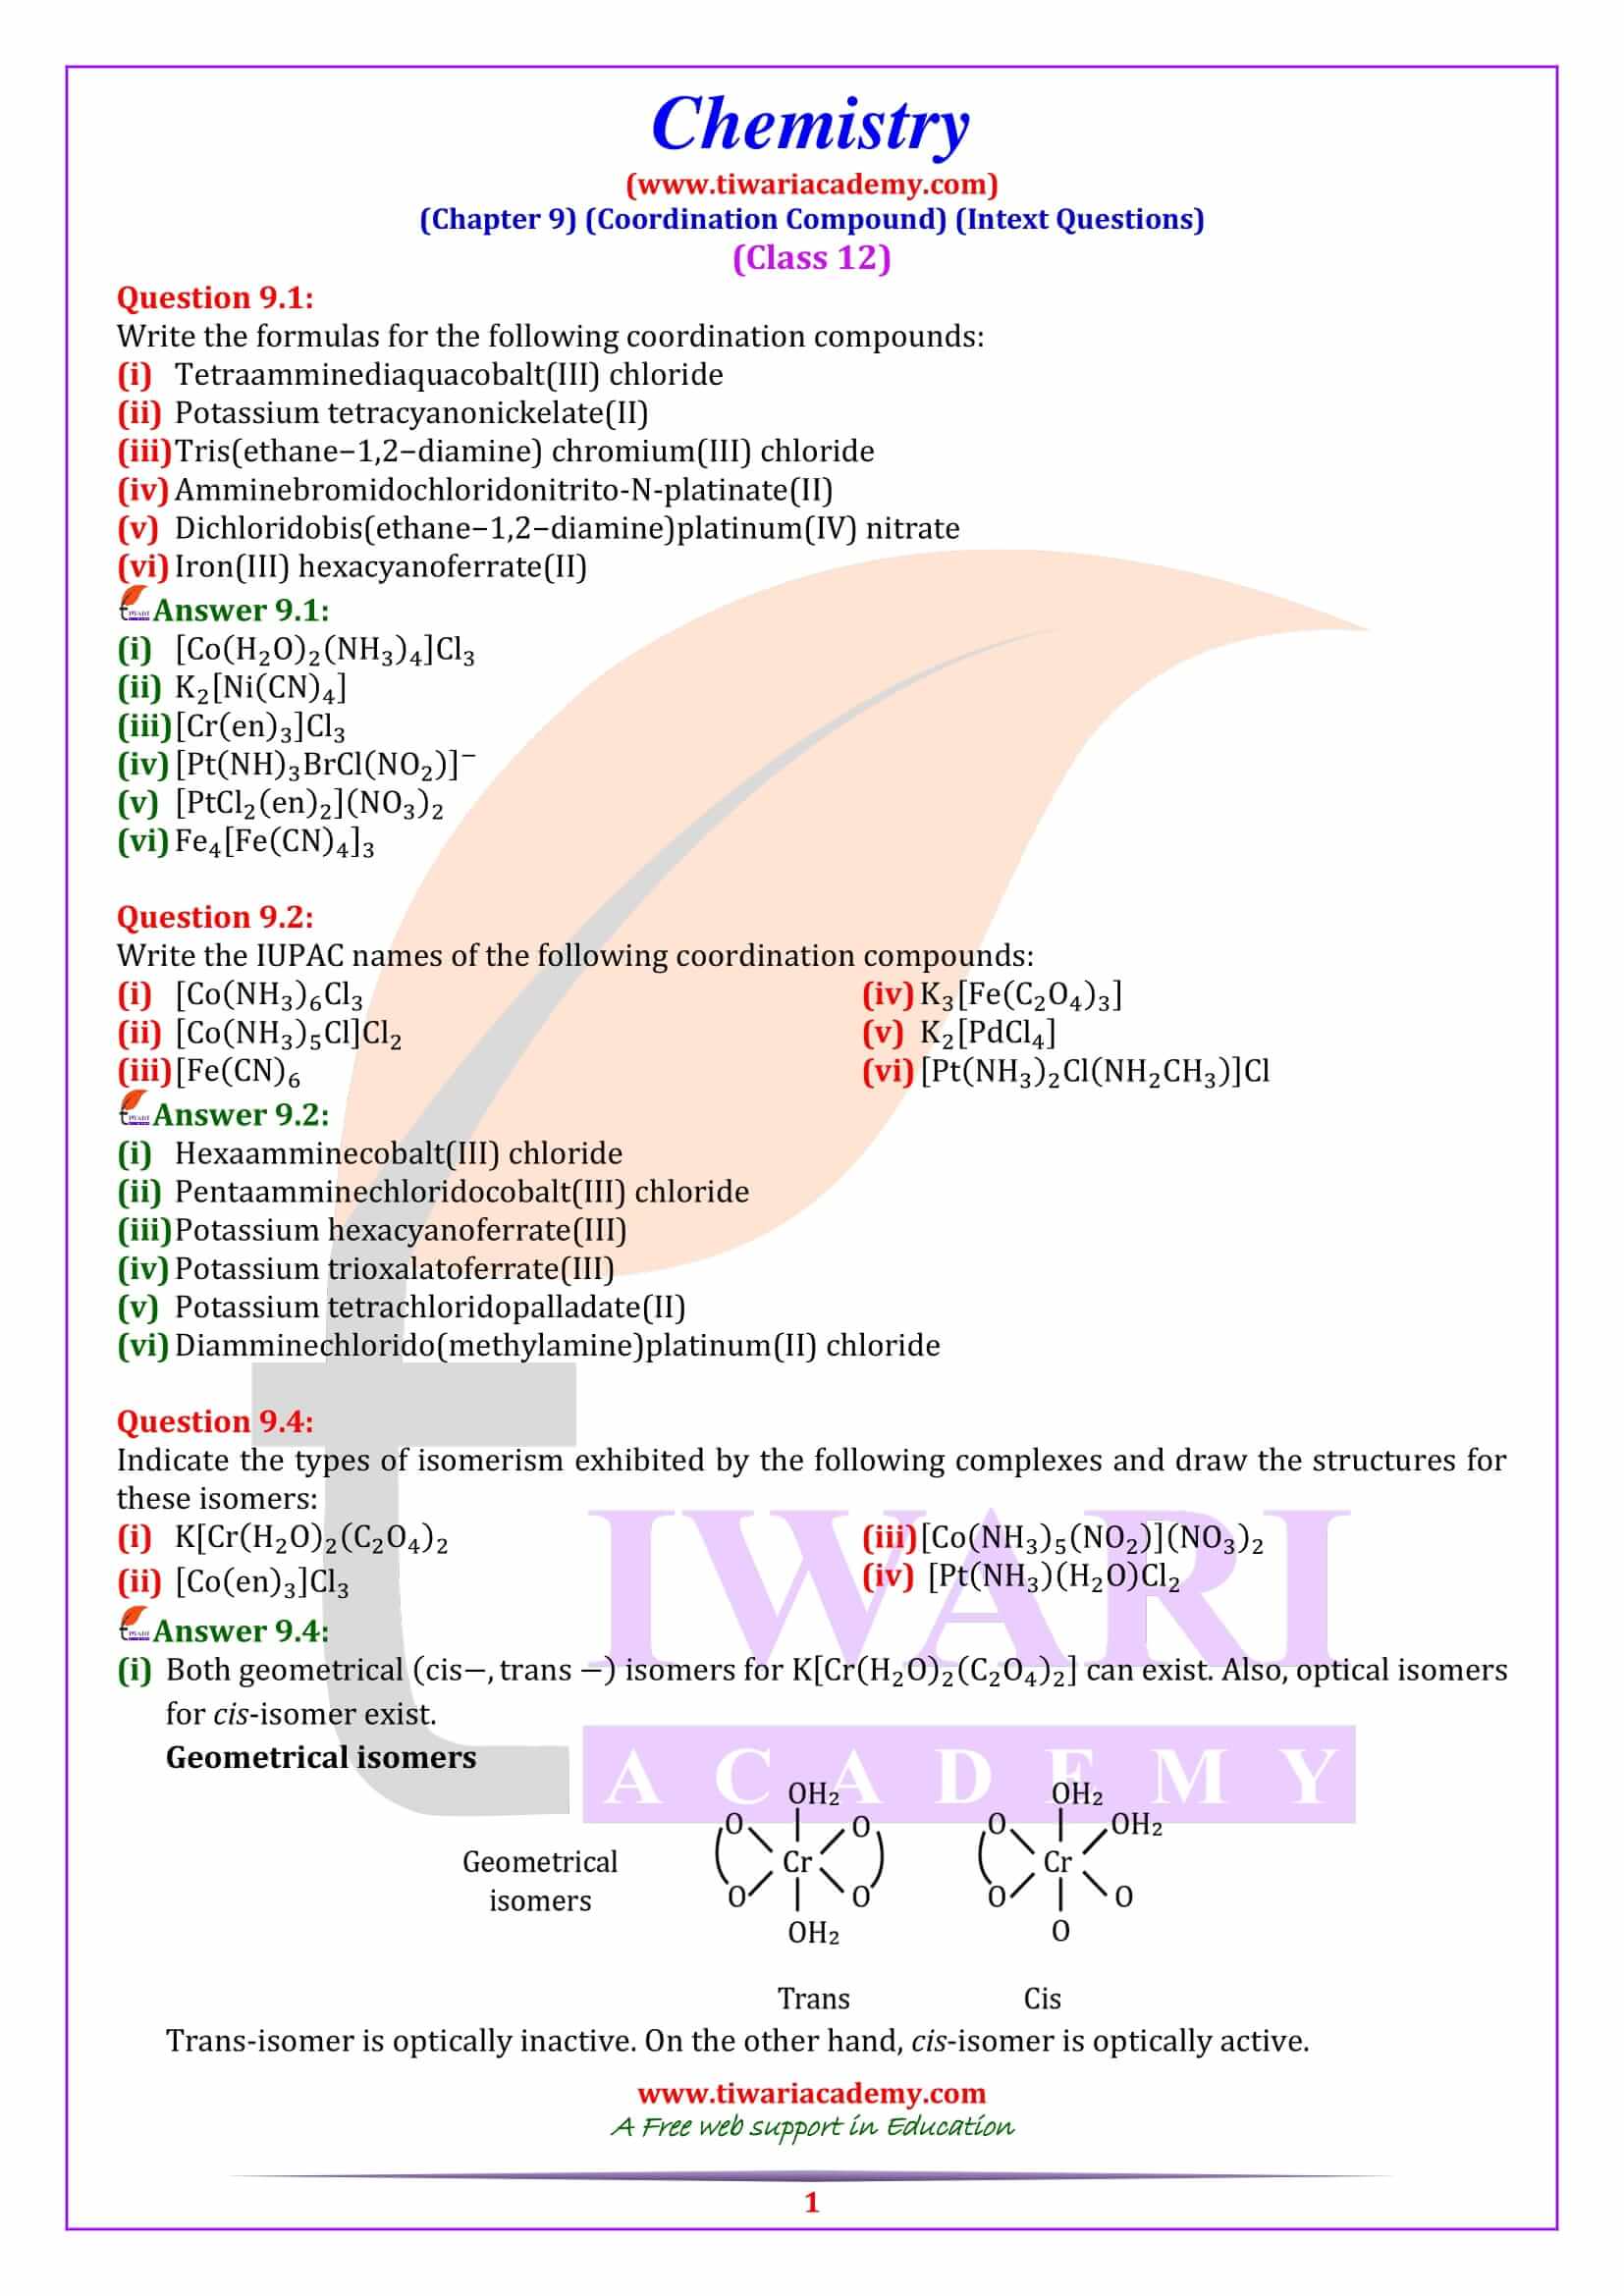 NCERT Solutions for Class 12 Chemistry Chapter 9 Intext